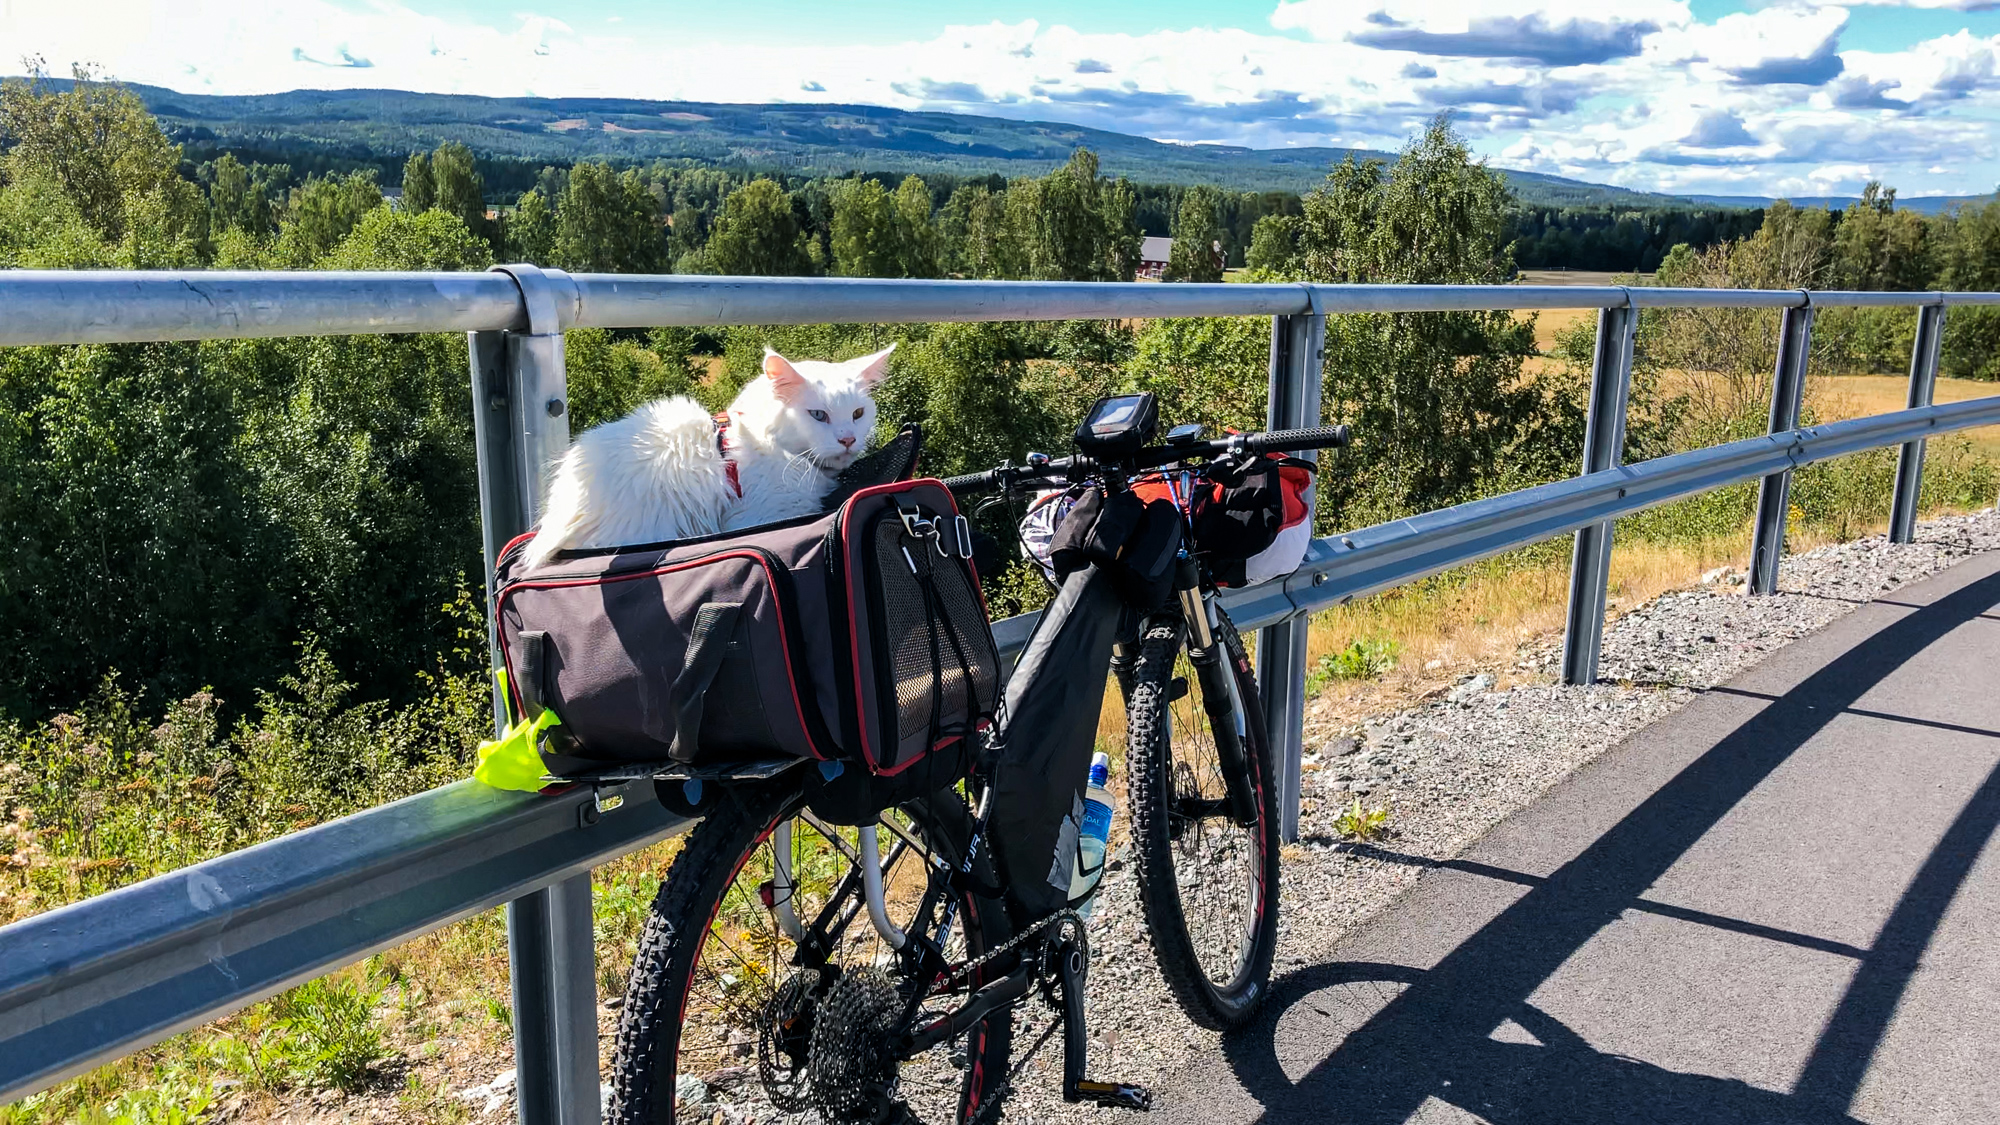 Cezar is no stranger to touring on bikes. Here, he sits comfortably in Norway. (Photo: Instagram/@cezars.crew)